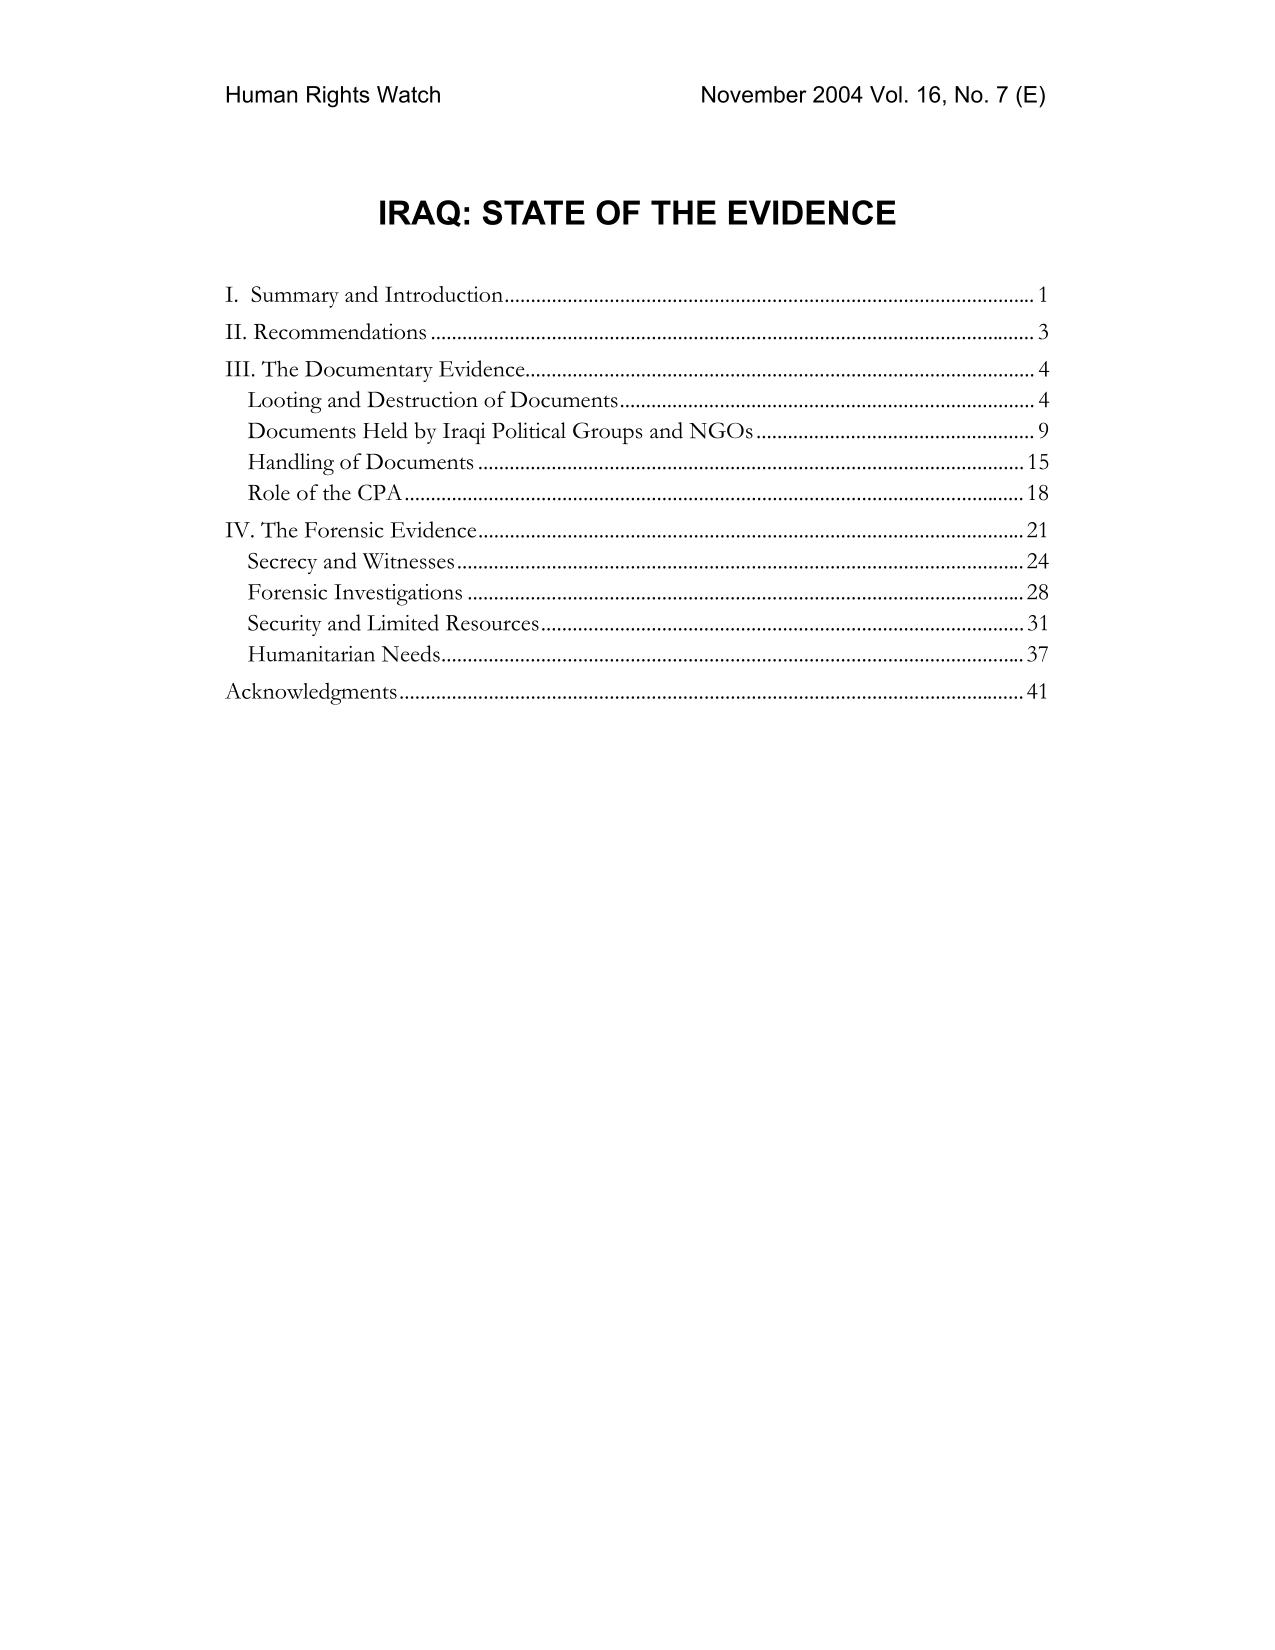 State of the Evidence